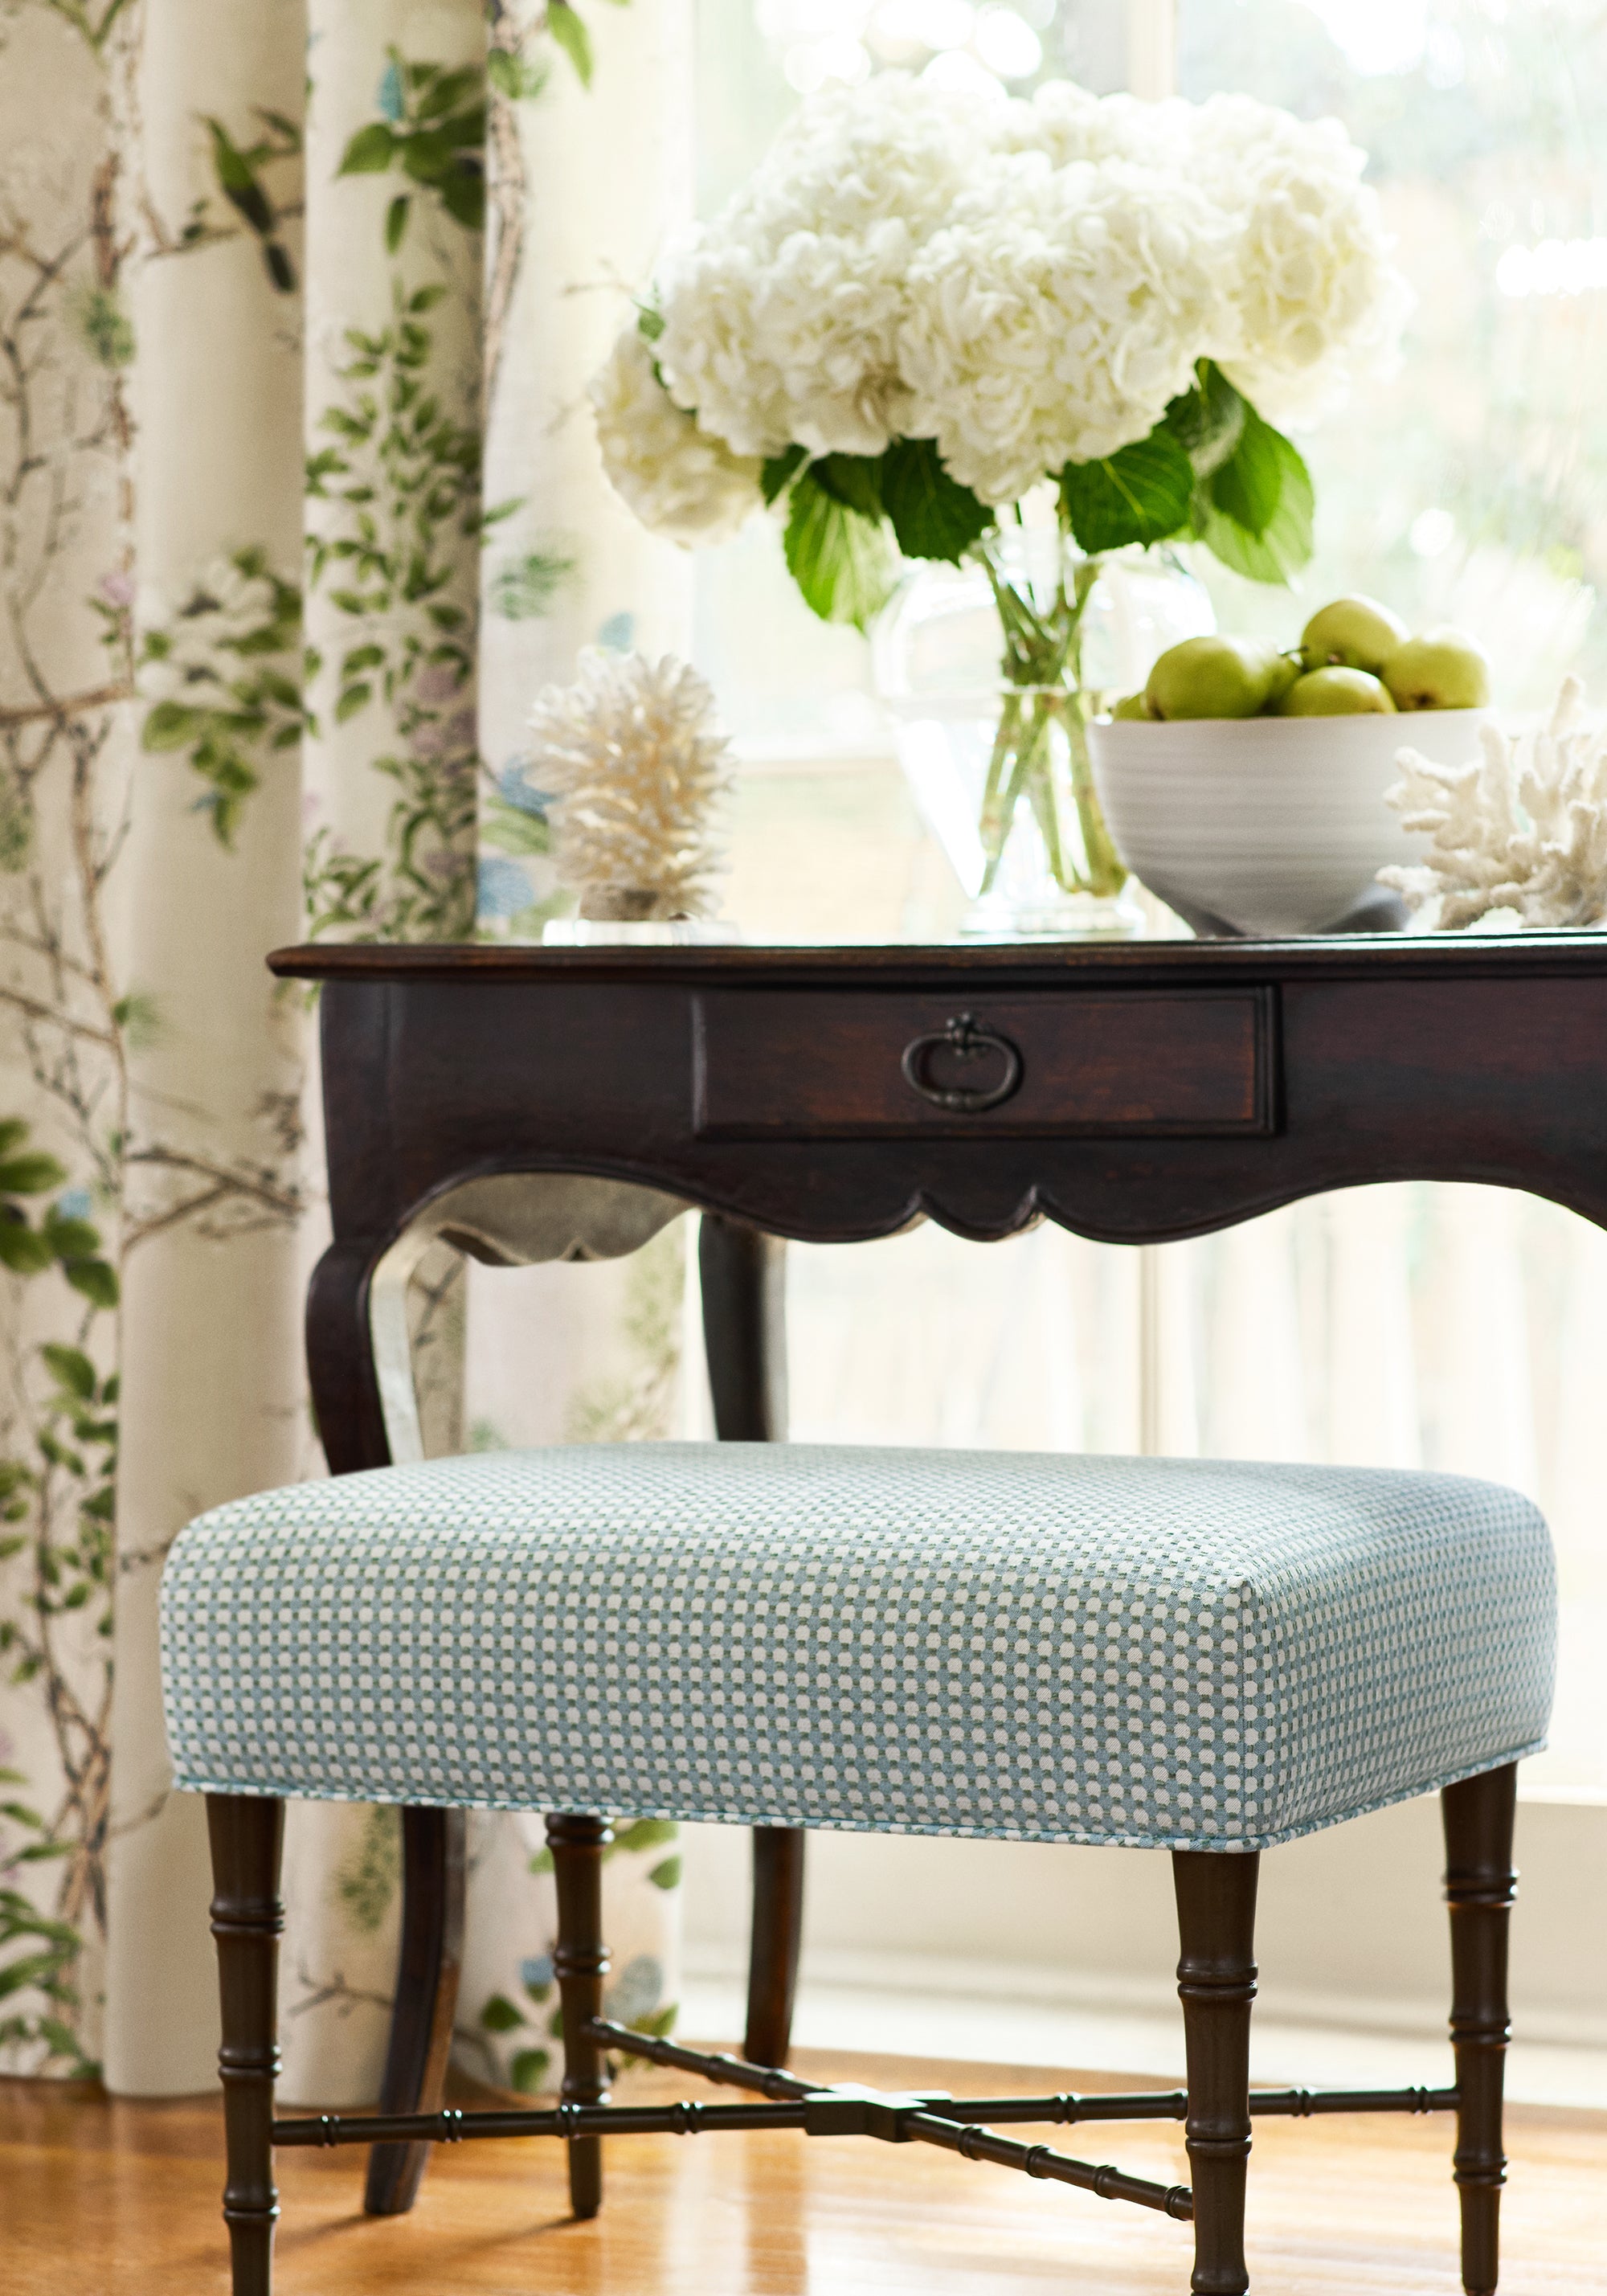 Eaton Ottoman in Darcy woven fabric in powder color - pattern number W81917 by Anna French in the Bristol collection